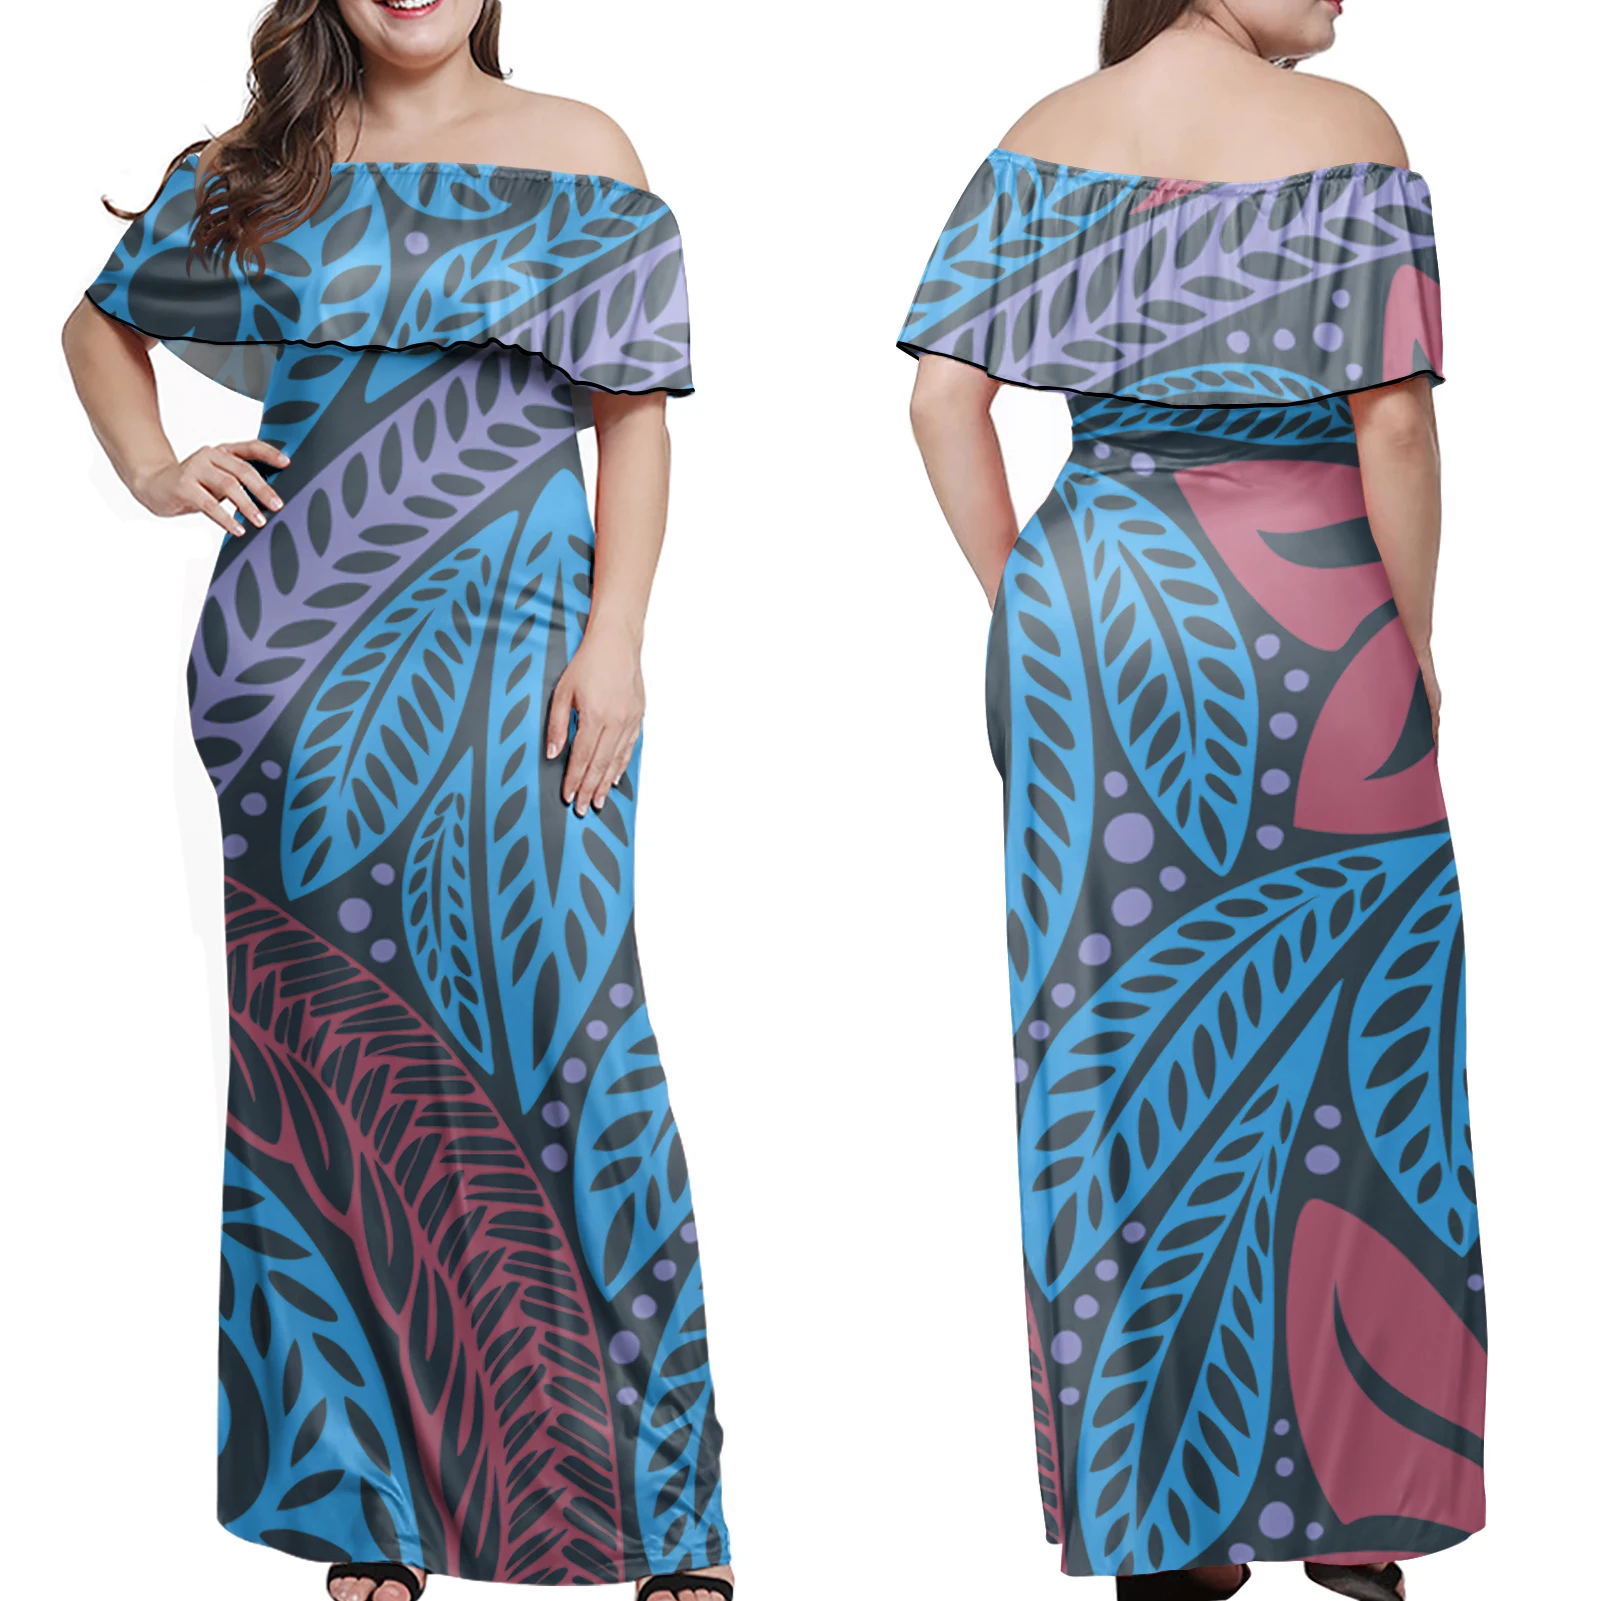 

Hawaii Polynesian Tribal and Tropical Leaves Print Off The Shoulder Ruffle Bodycon Party Maxi Summer Dresses Ladies Women 2021, Customized color